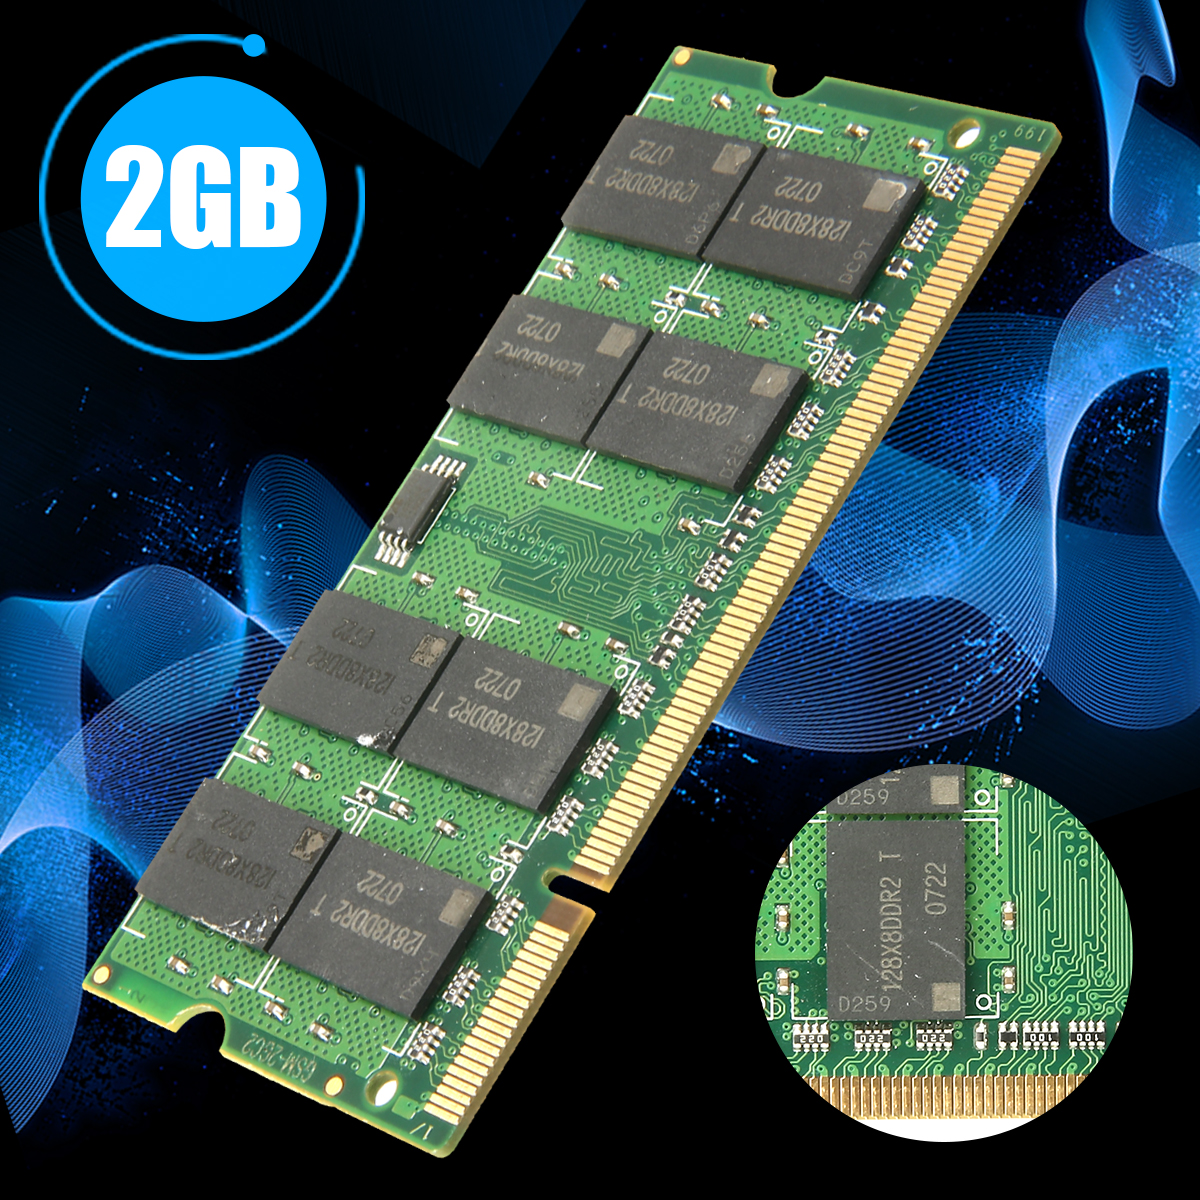 Pohiks 1pc 1.8V 2GB PC2-6400 DDR2-800MHz Ram Non-ECC CL5 Laptop 200pin SODIMM Memory Rams FOR Computer Laptop Notebook